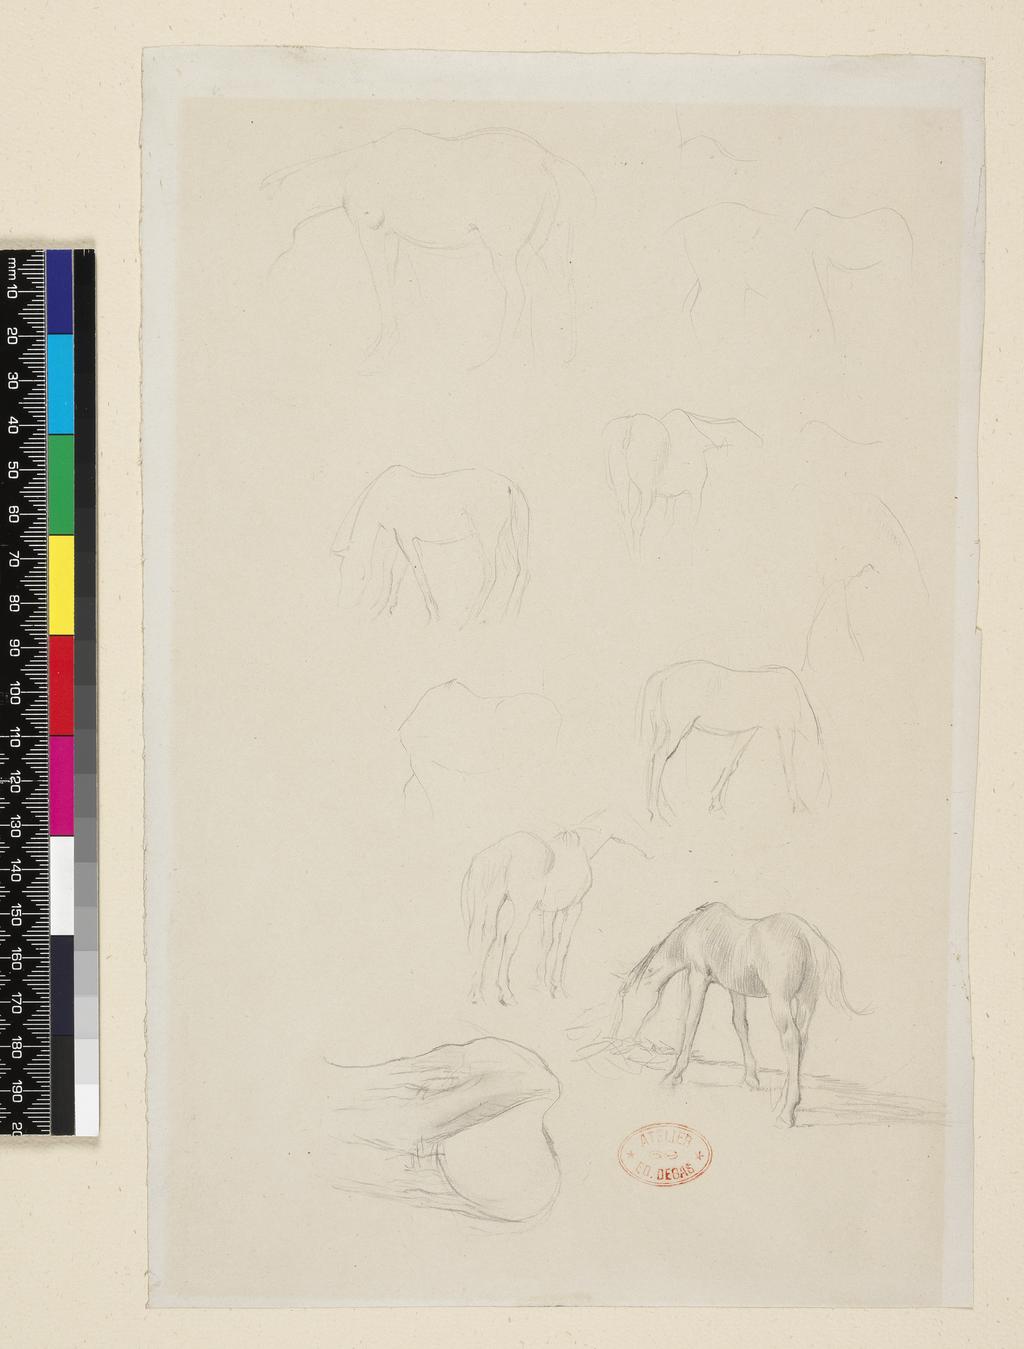 An image of Studies of a pony. Degas, Edgar (French, 1834-1917). Graphite on paper, height 285 mm, width 189 mm, circa 1871. Notes: or perhaps a study for Deux chevaud au Pâturage.